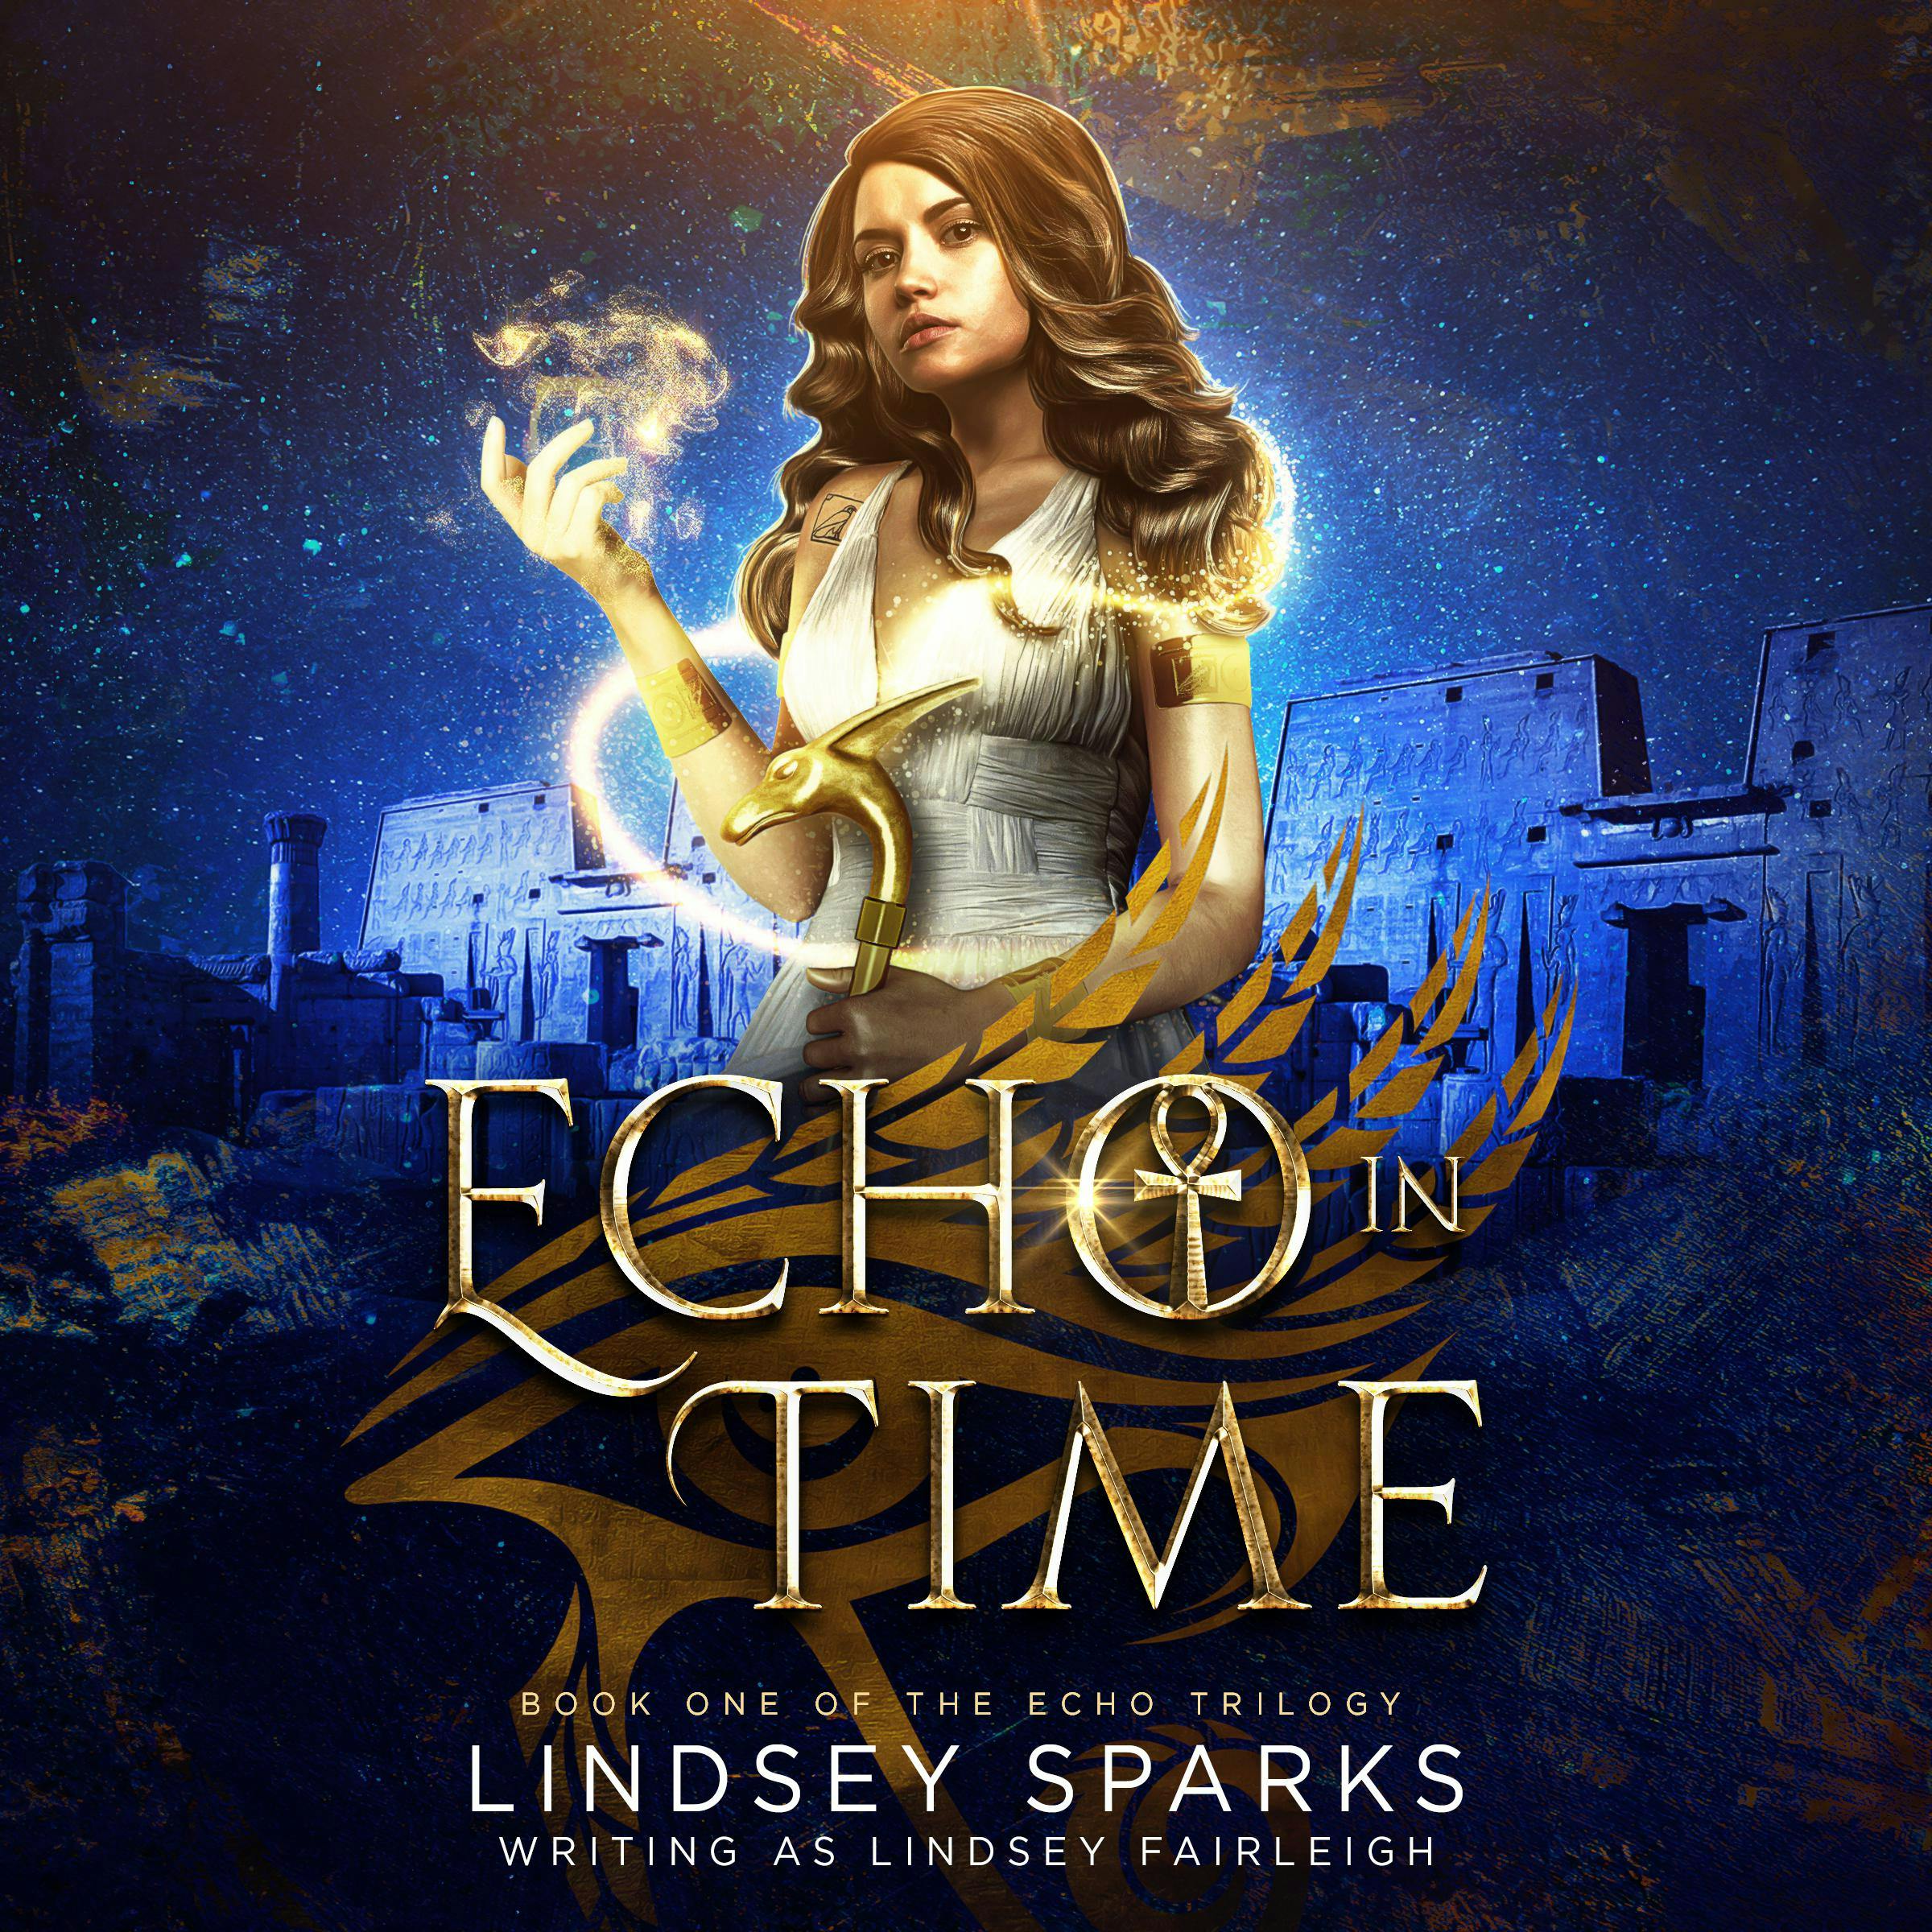 Echo in Time (Echo Trilogy, #1) - Lindsey Fairleigh, Lindsey Sparks